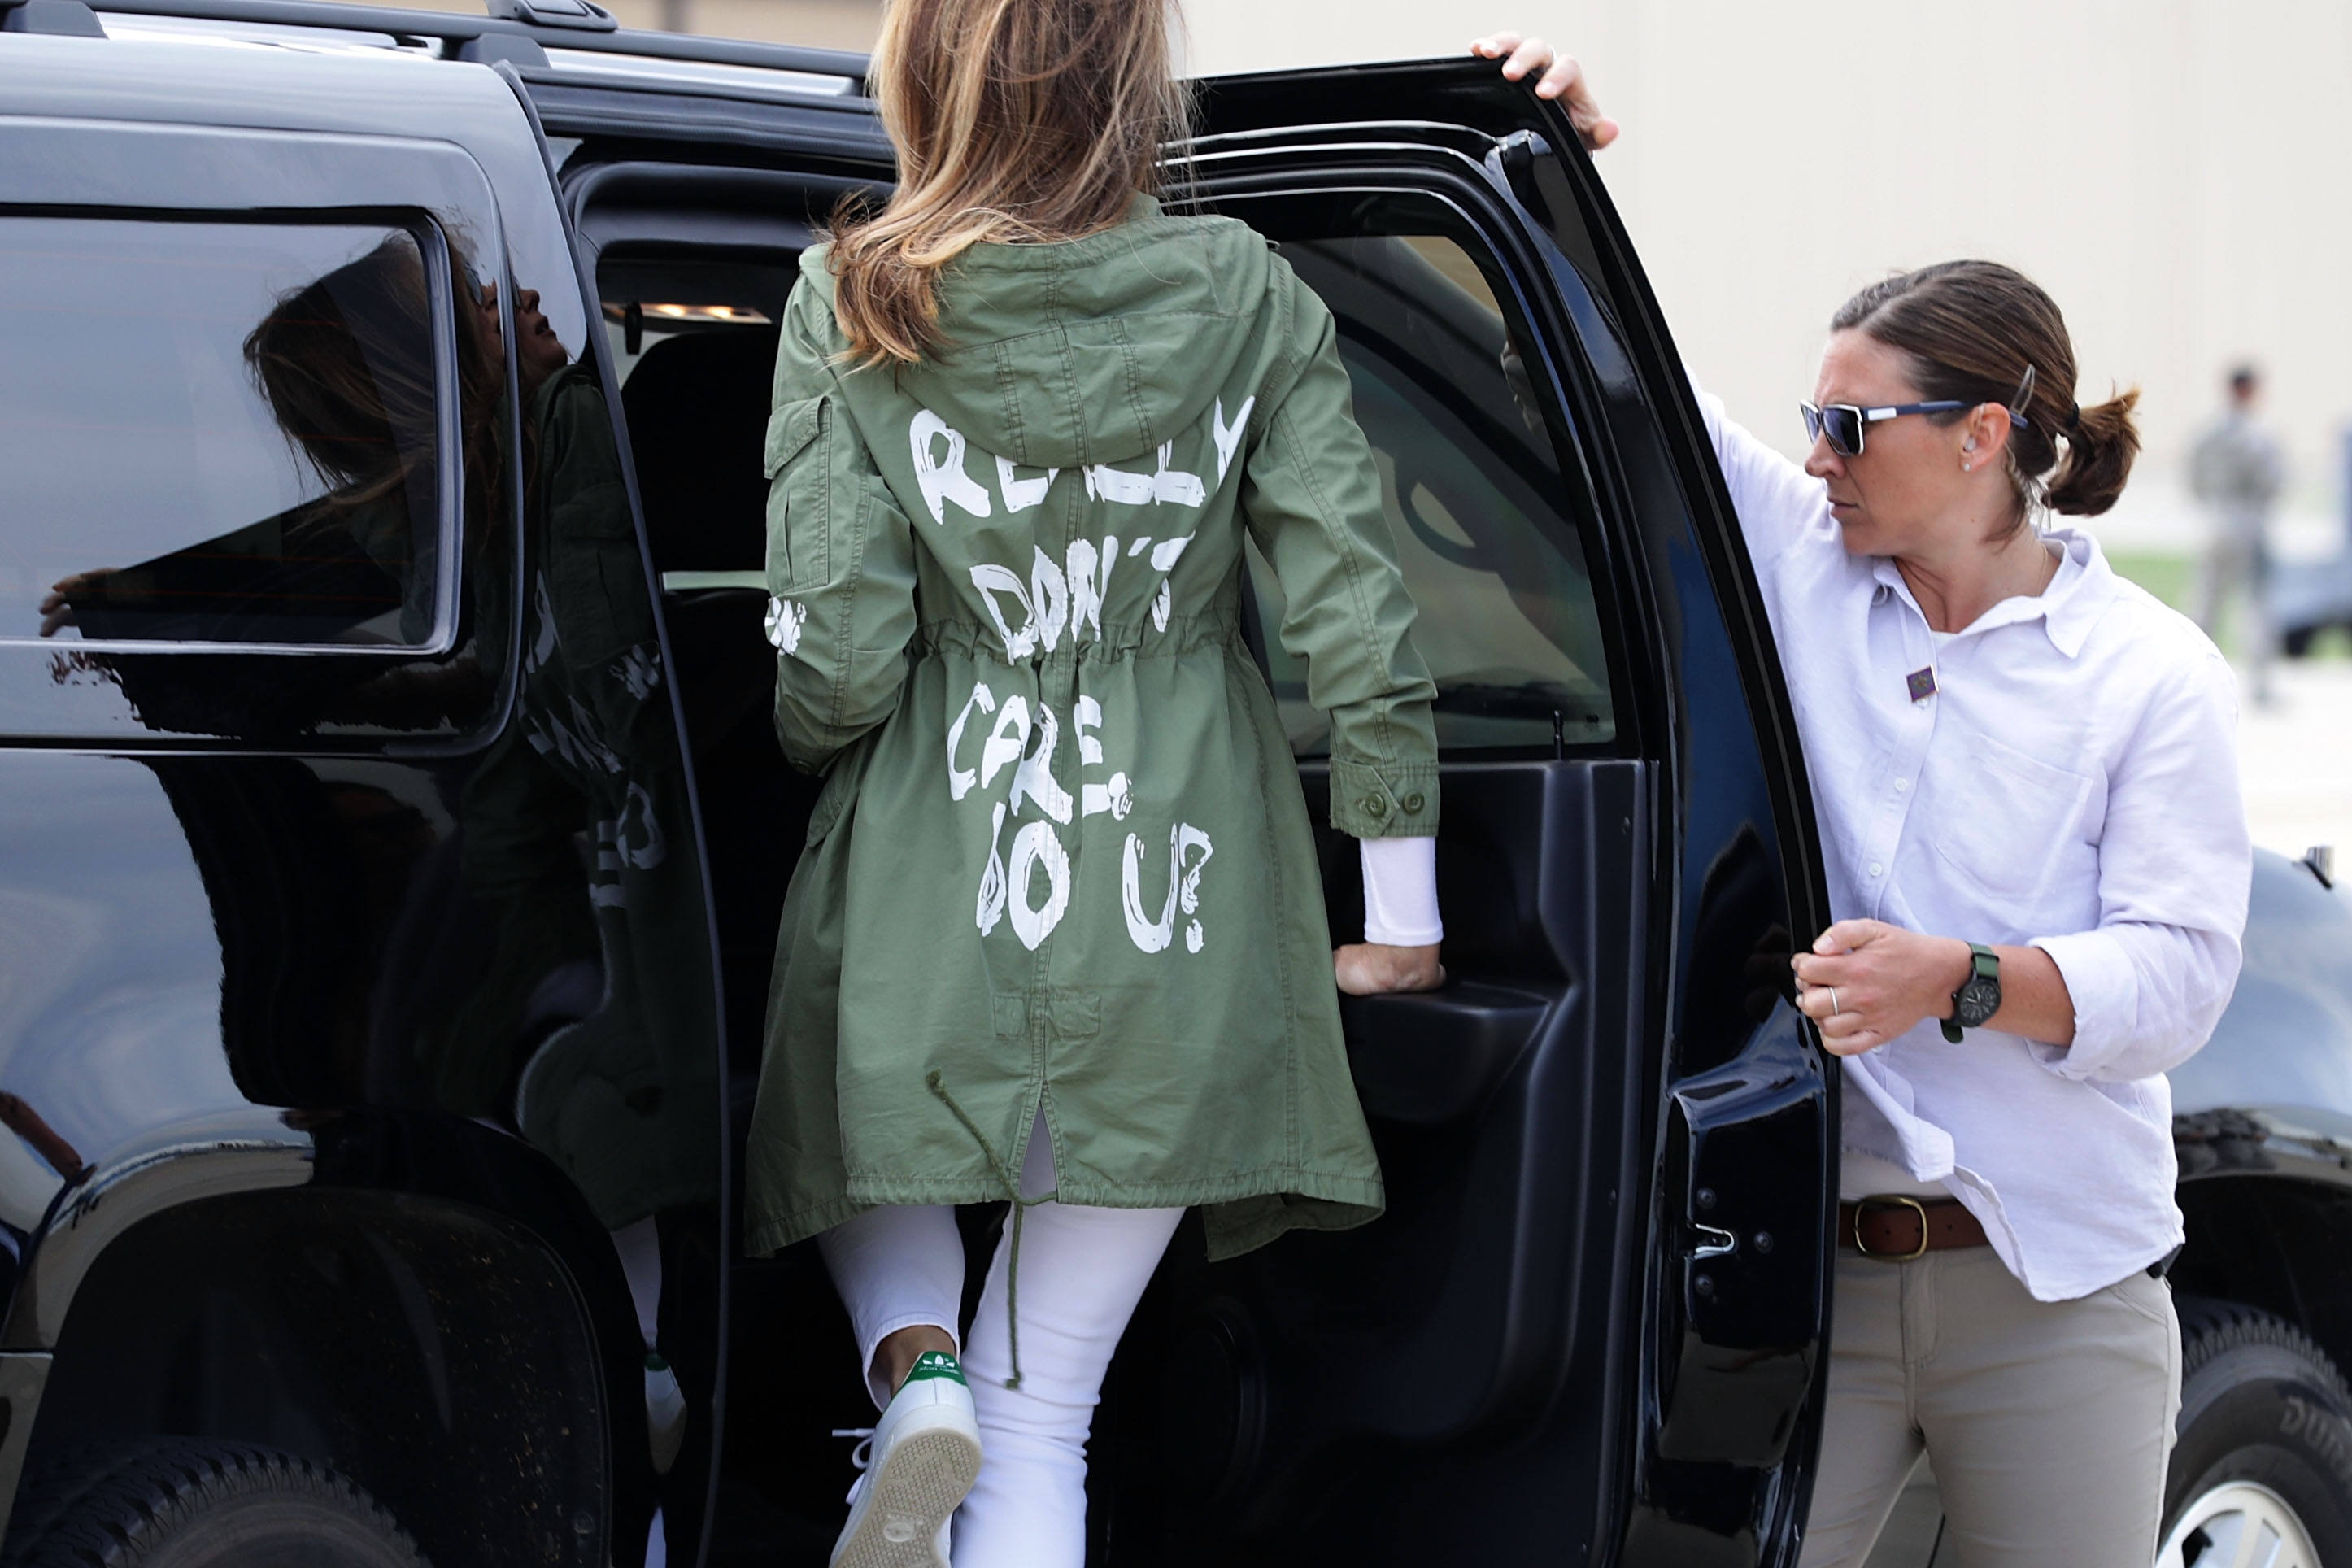 Melania Trump Wears ‘I Really Don’t Care’ Jacket En Route To Visit Kids In Detention